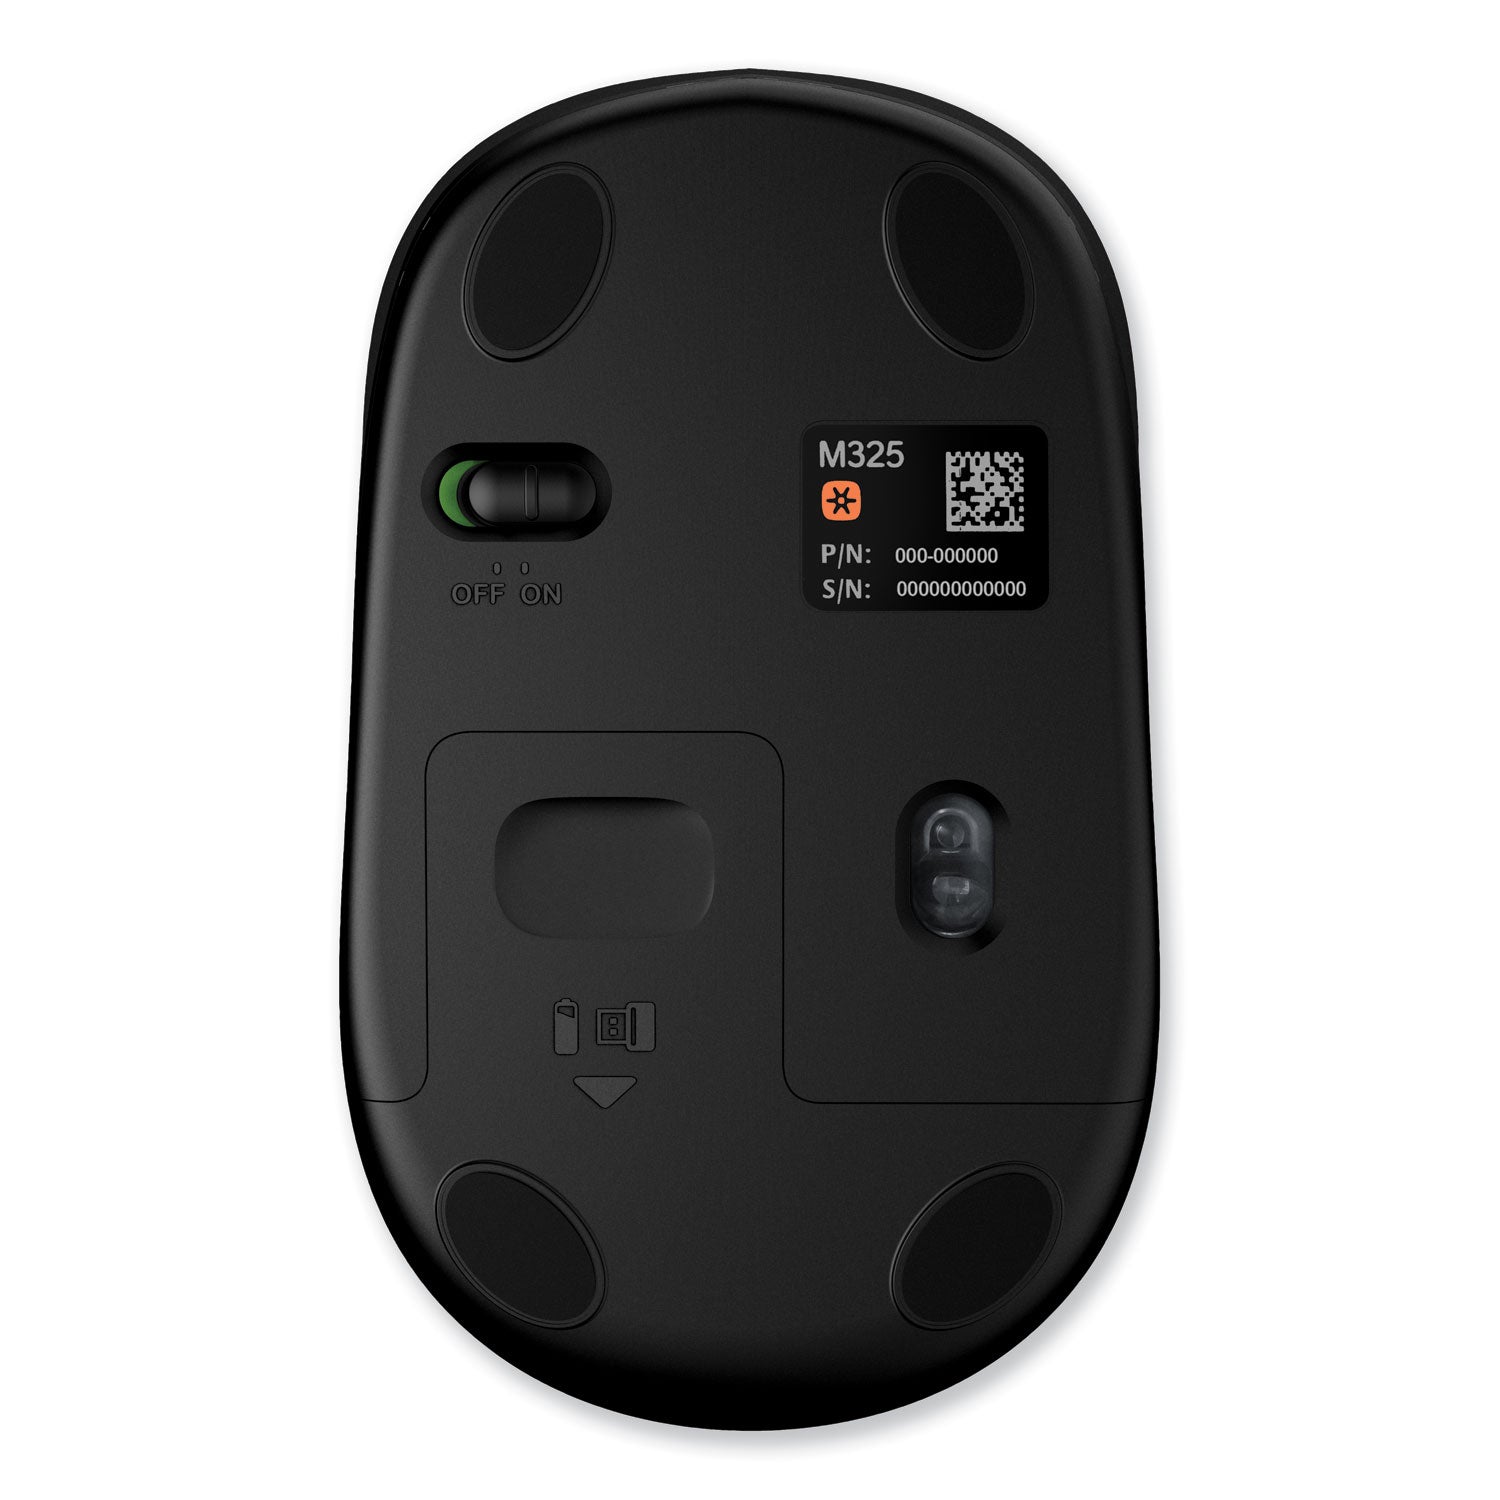 M325 Wireless Mouse, 2.4 GHz Frequency/30 ft Wireless Range, Left/Right Hand Use, Blue - 